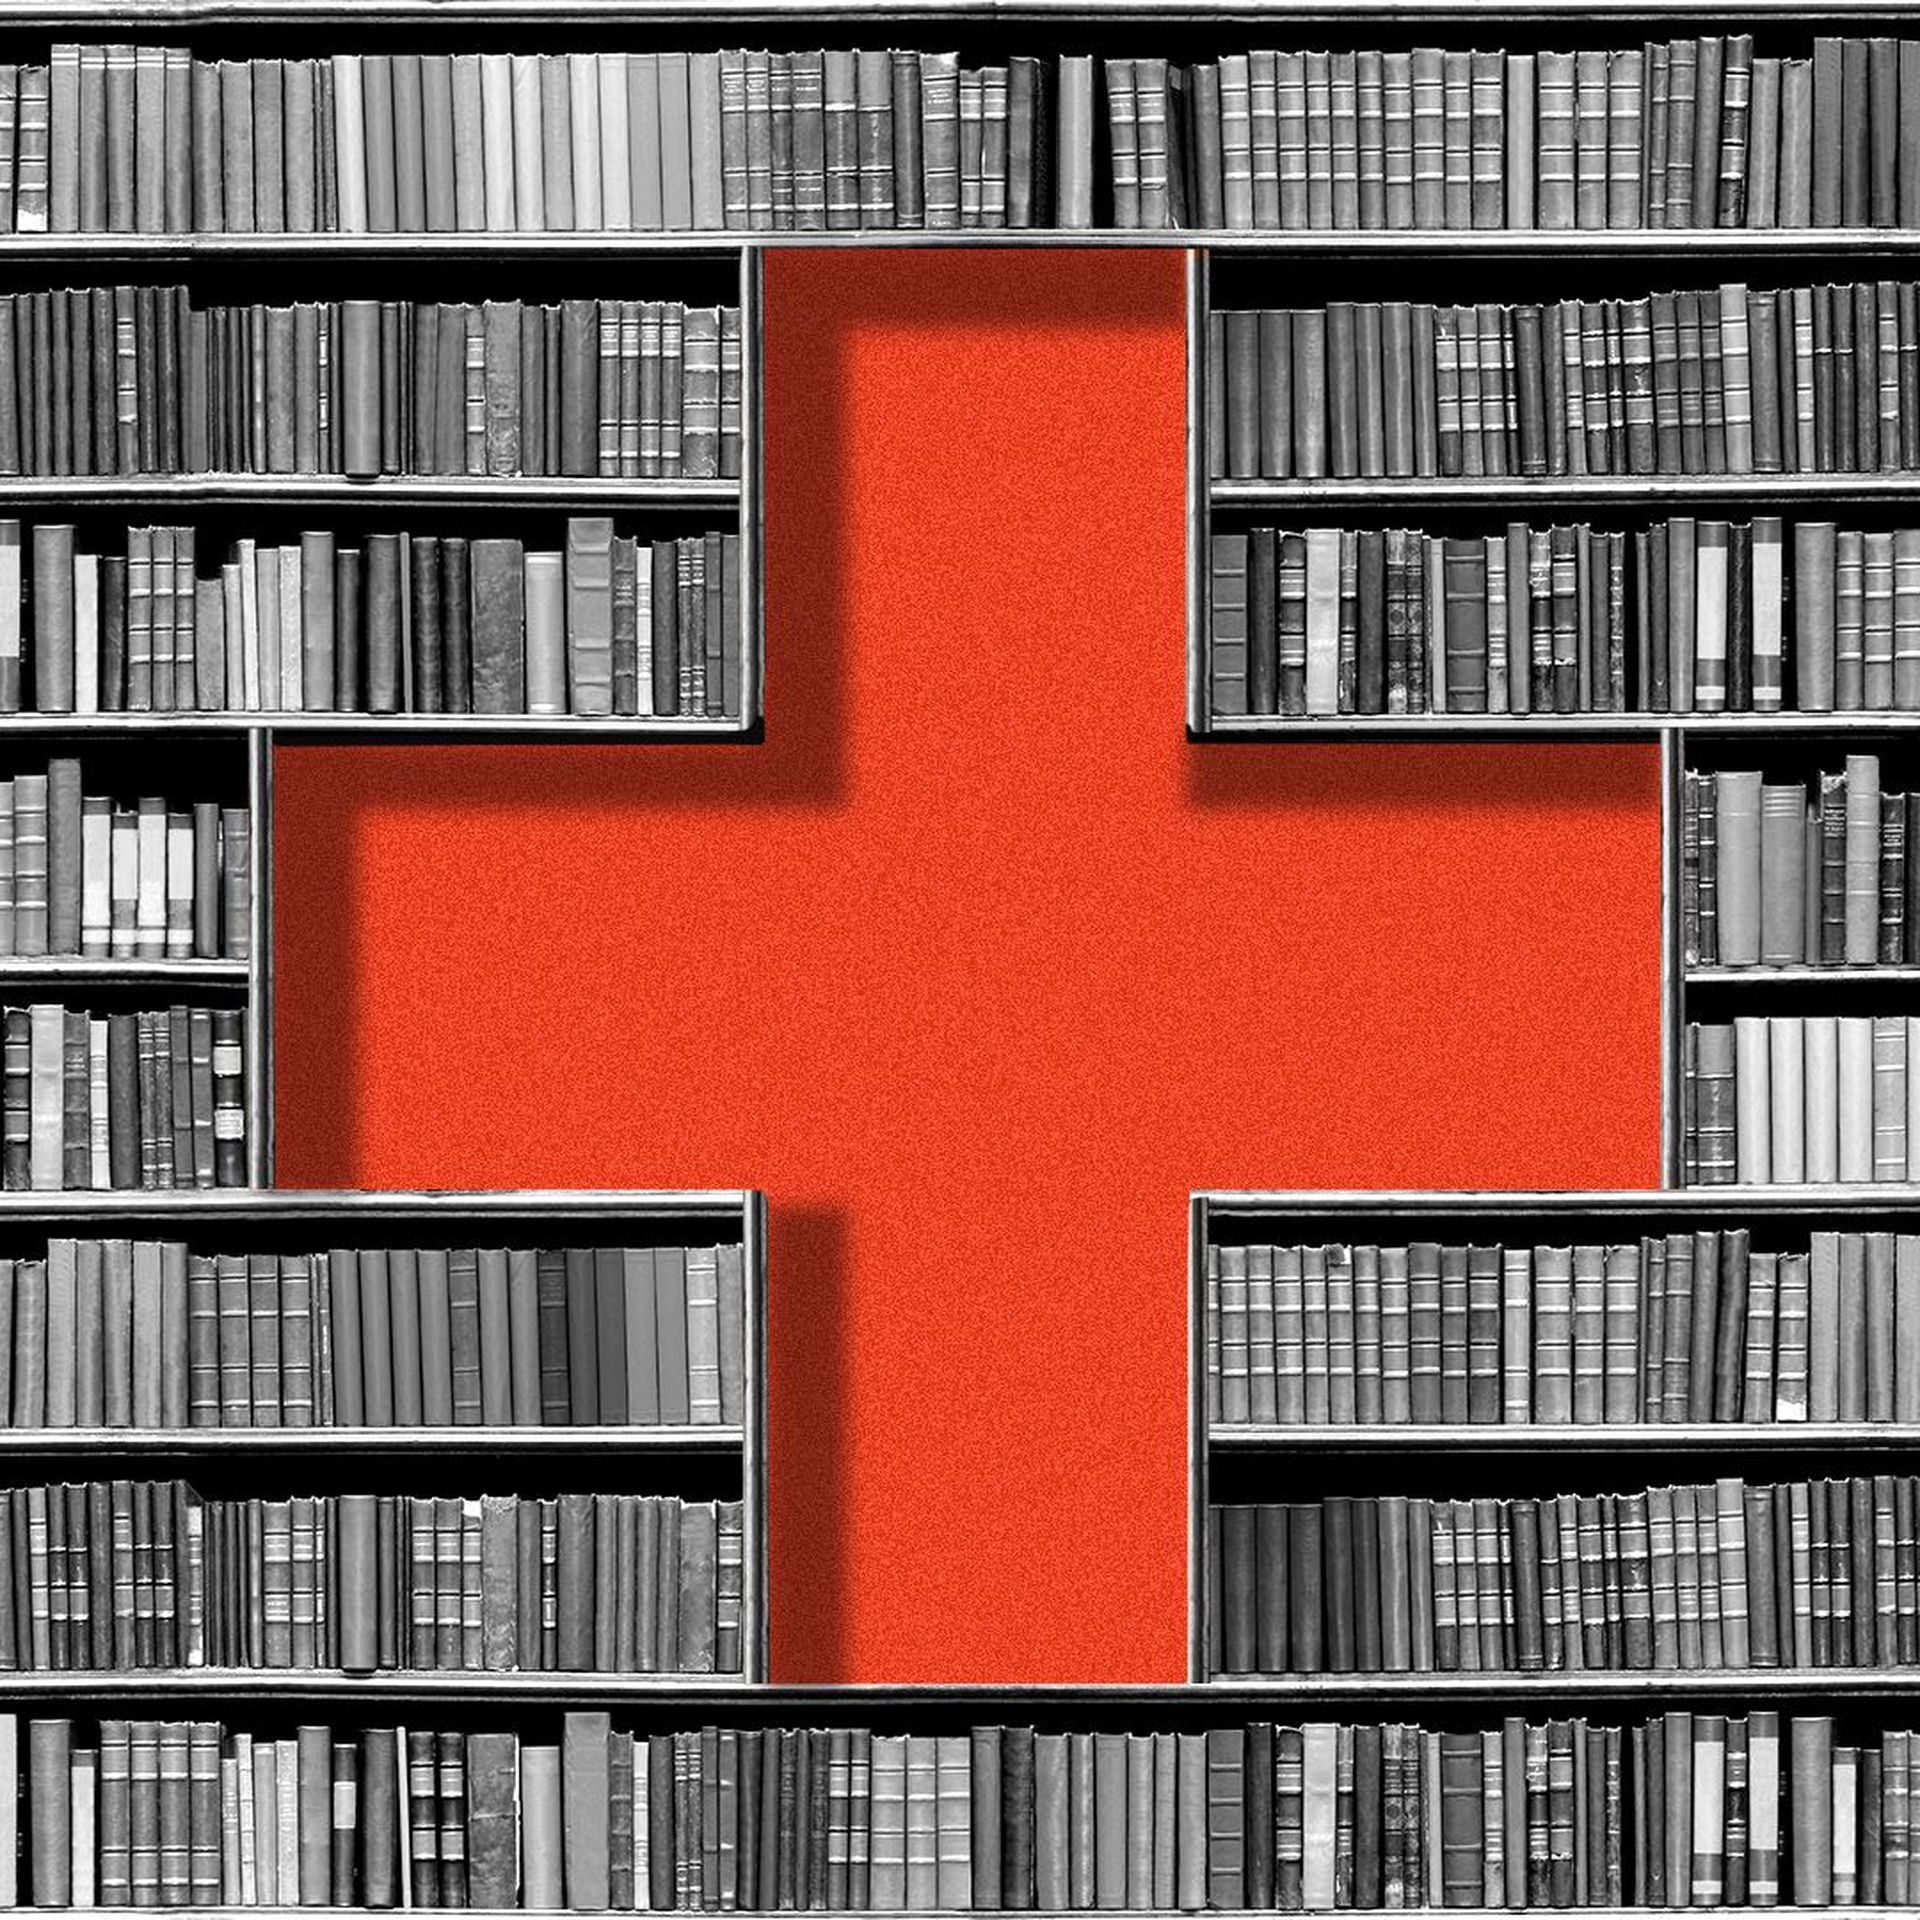 Illustration of a book shelf with a health plus made from negative space.